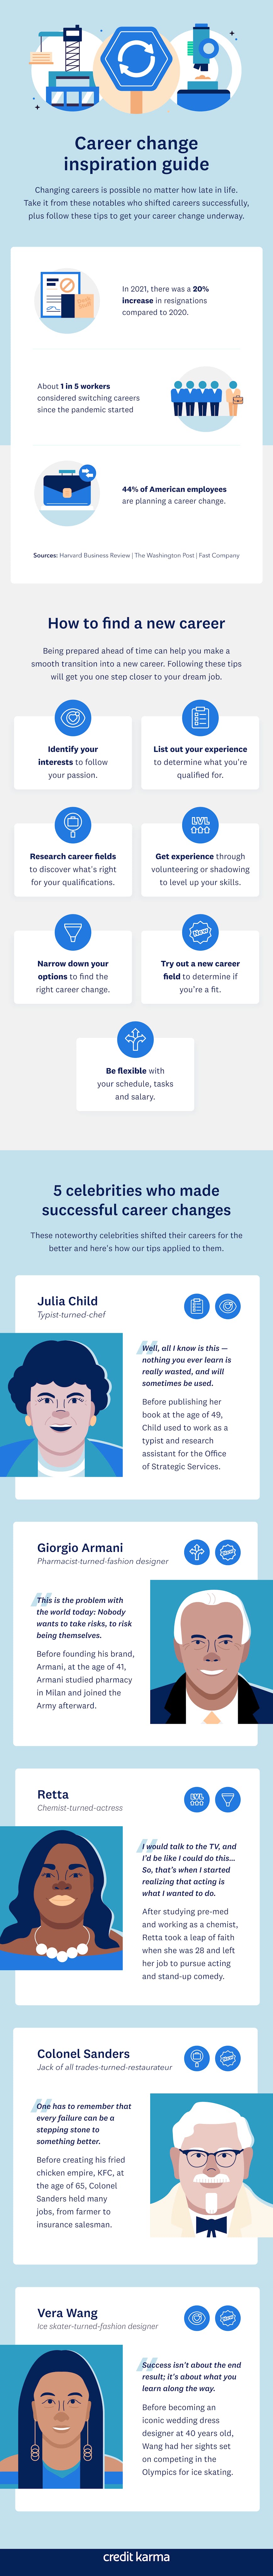 how-to-start-a-new-career-infographic@2x-2